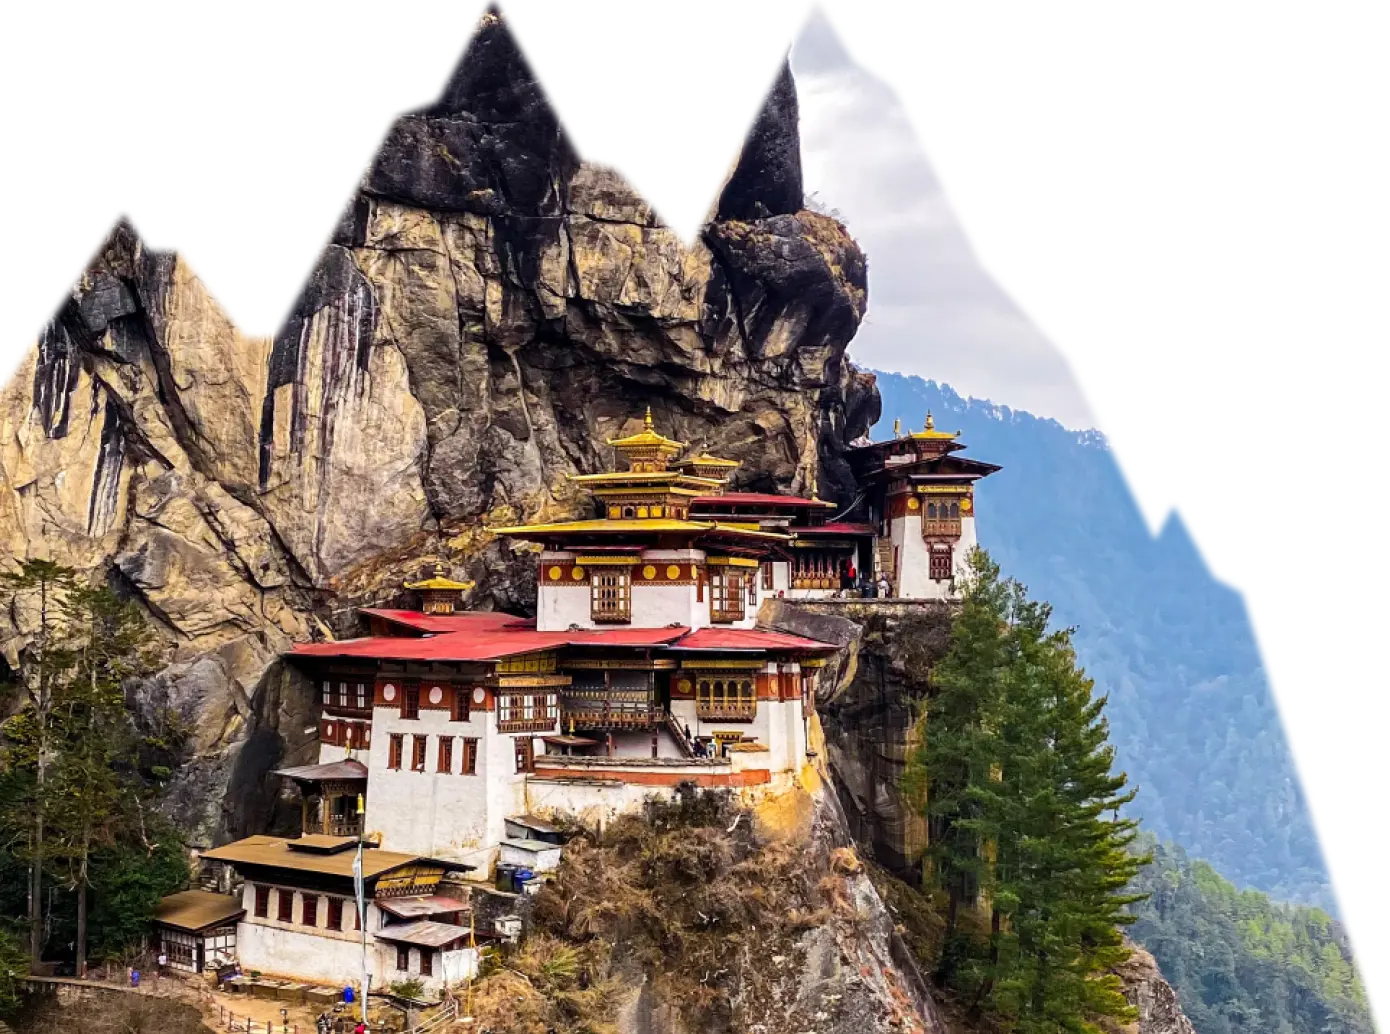 Beautiful Bhutanese fortress with intricate details and colorful embellishments